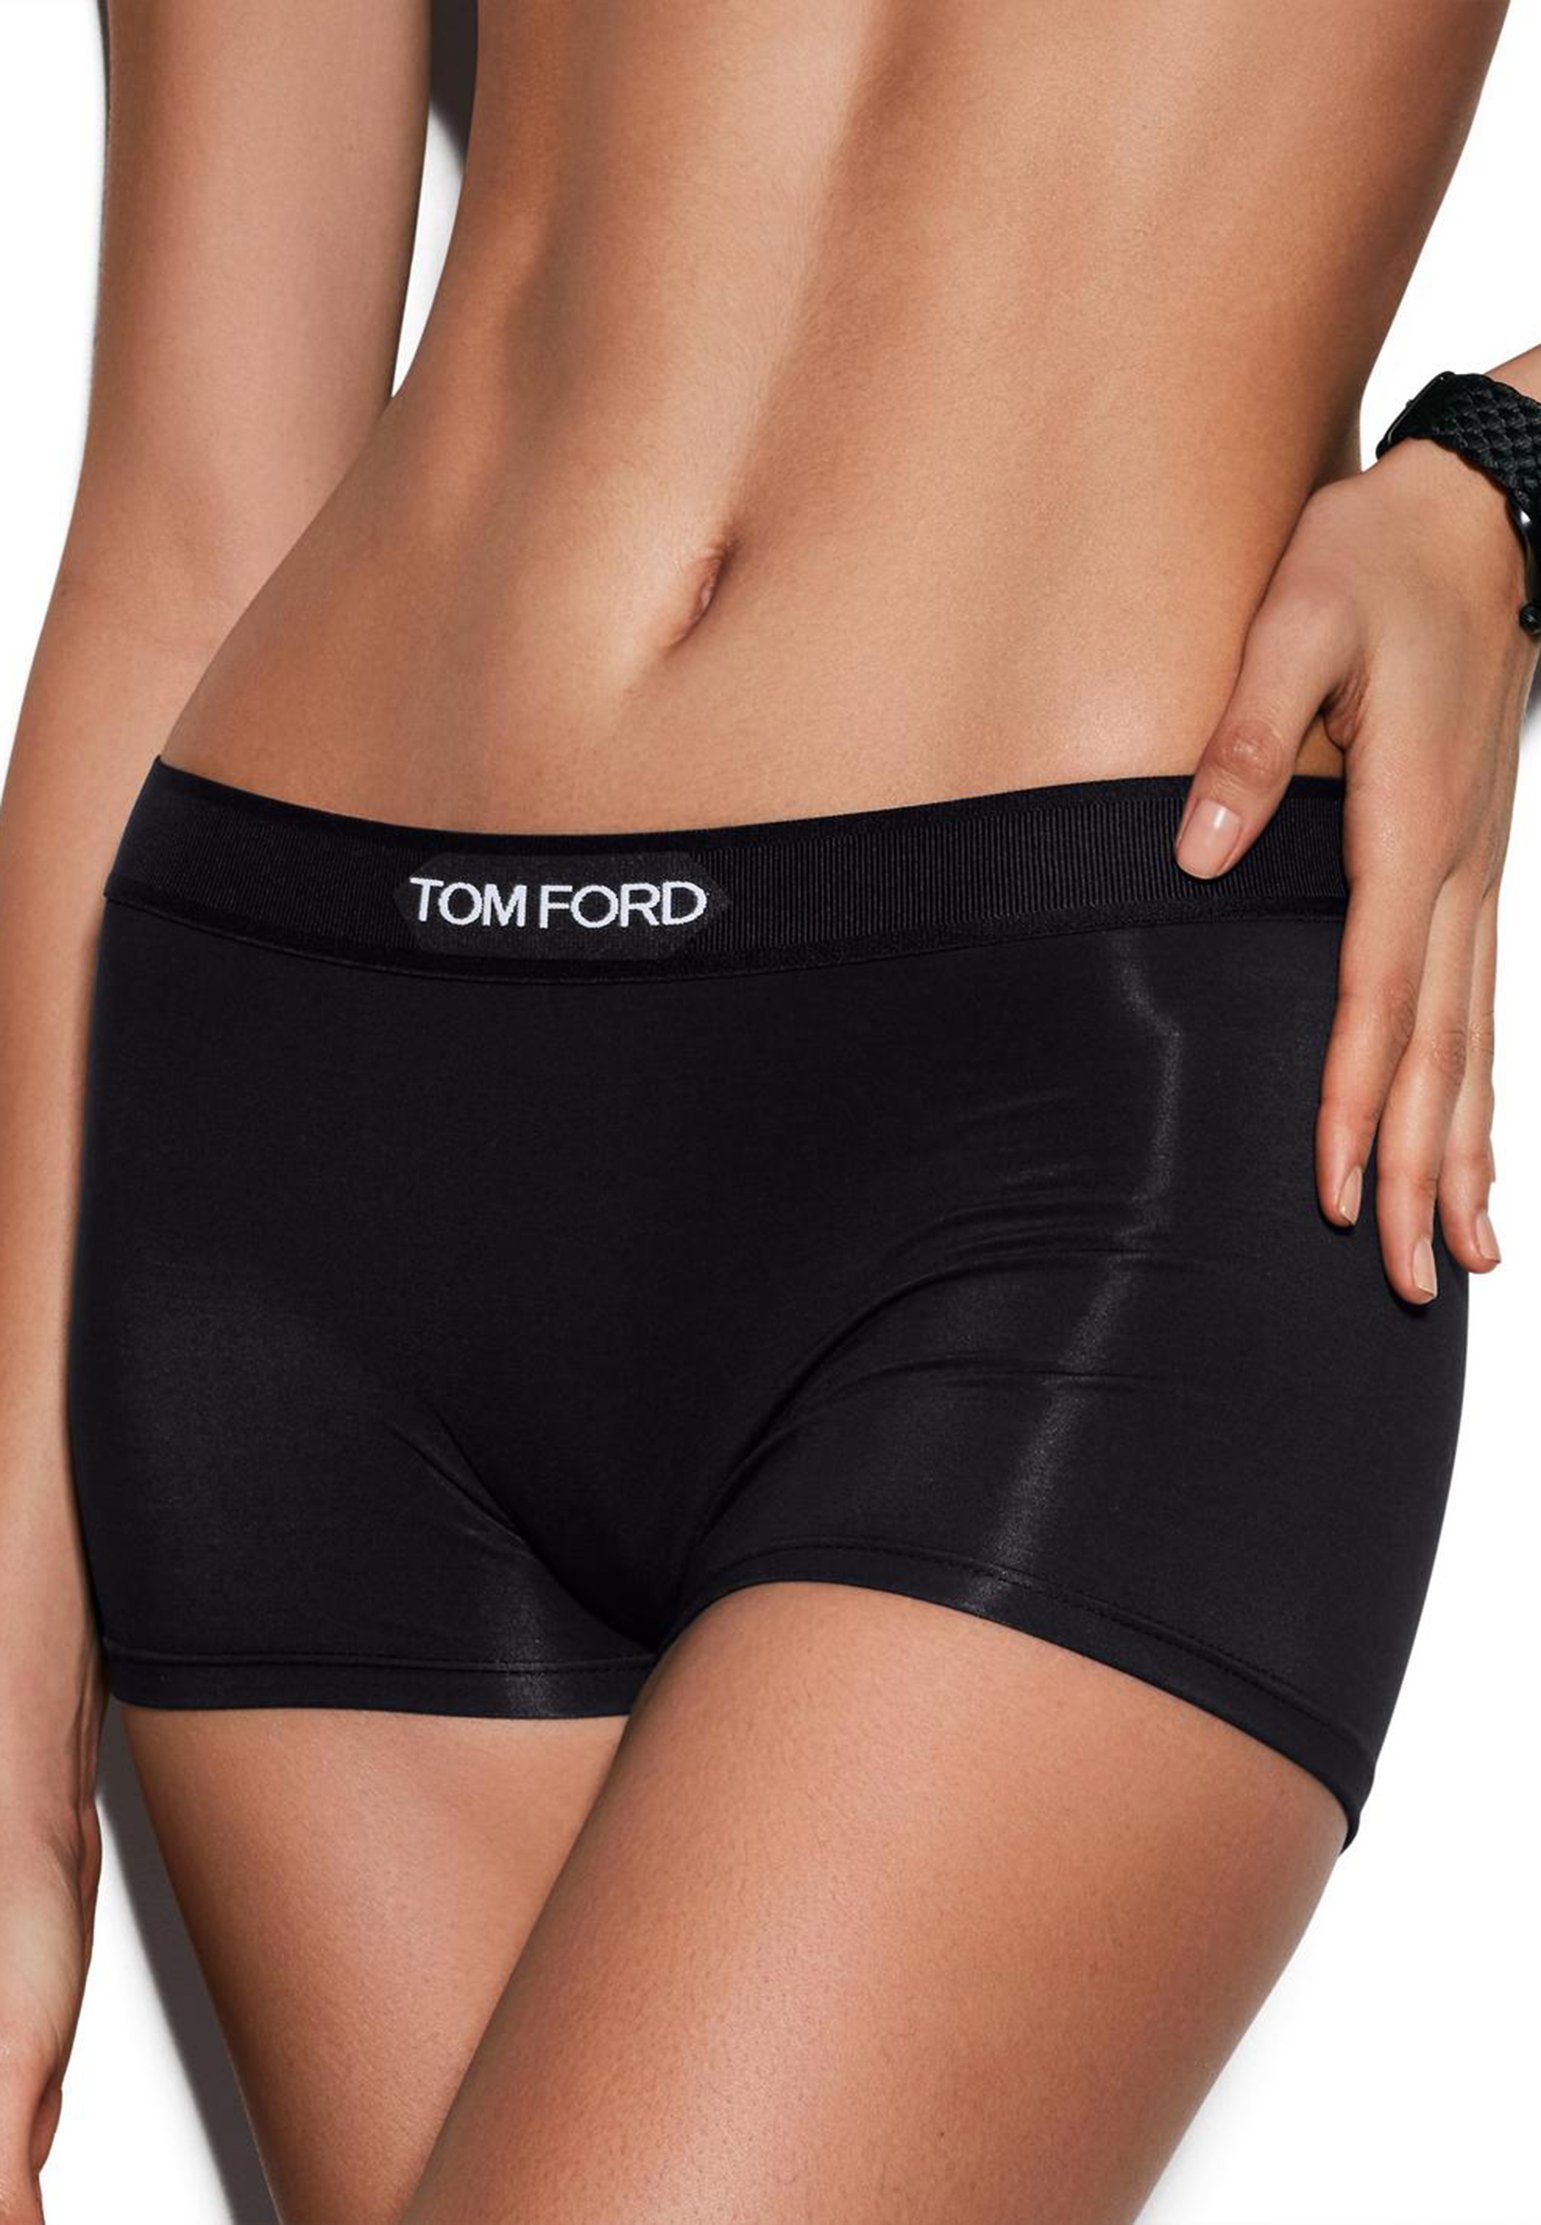 Boxers TOM FORD Color: black (Code: 3702) in online store Allure